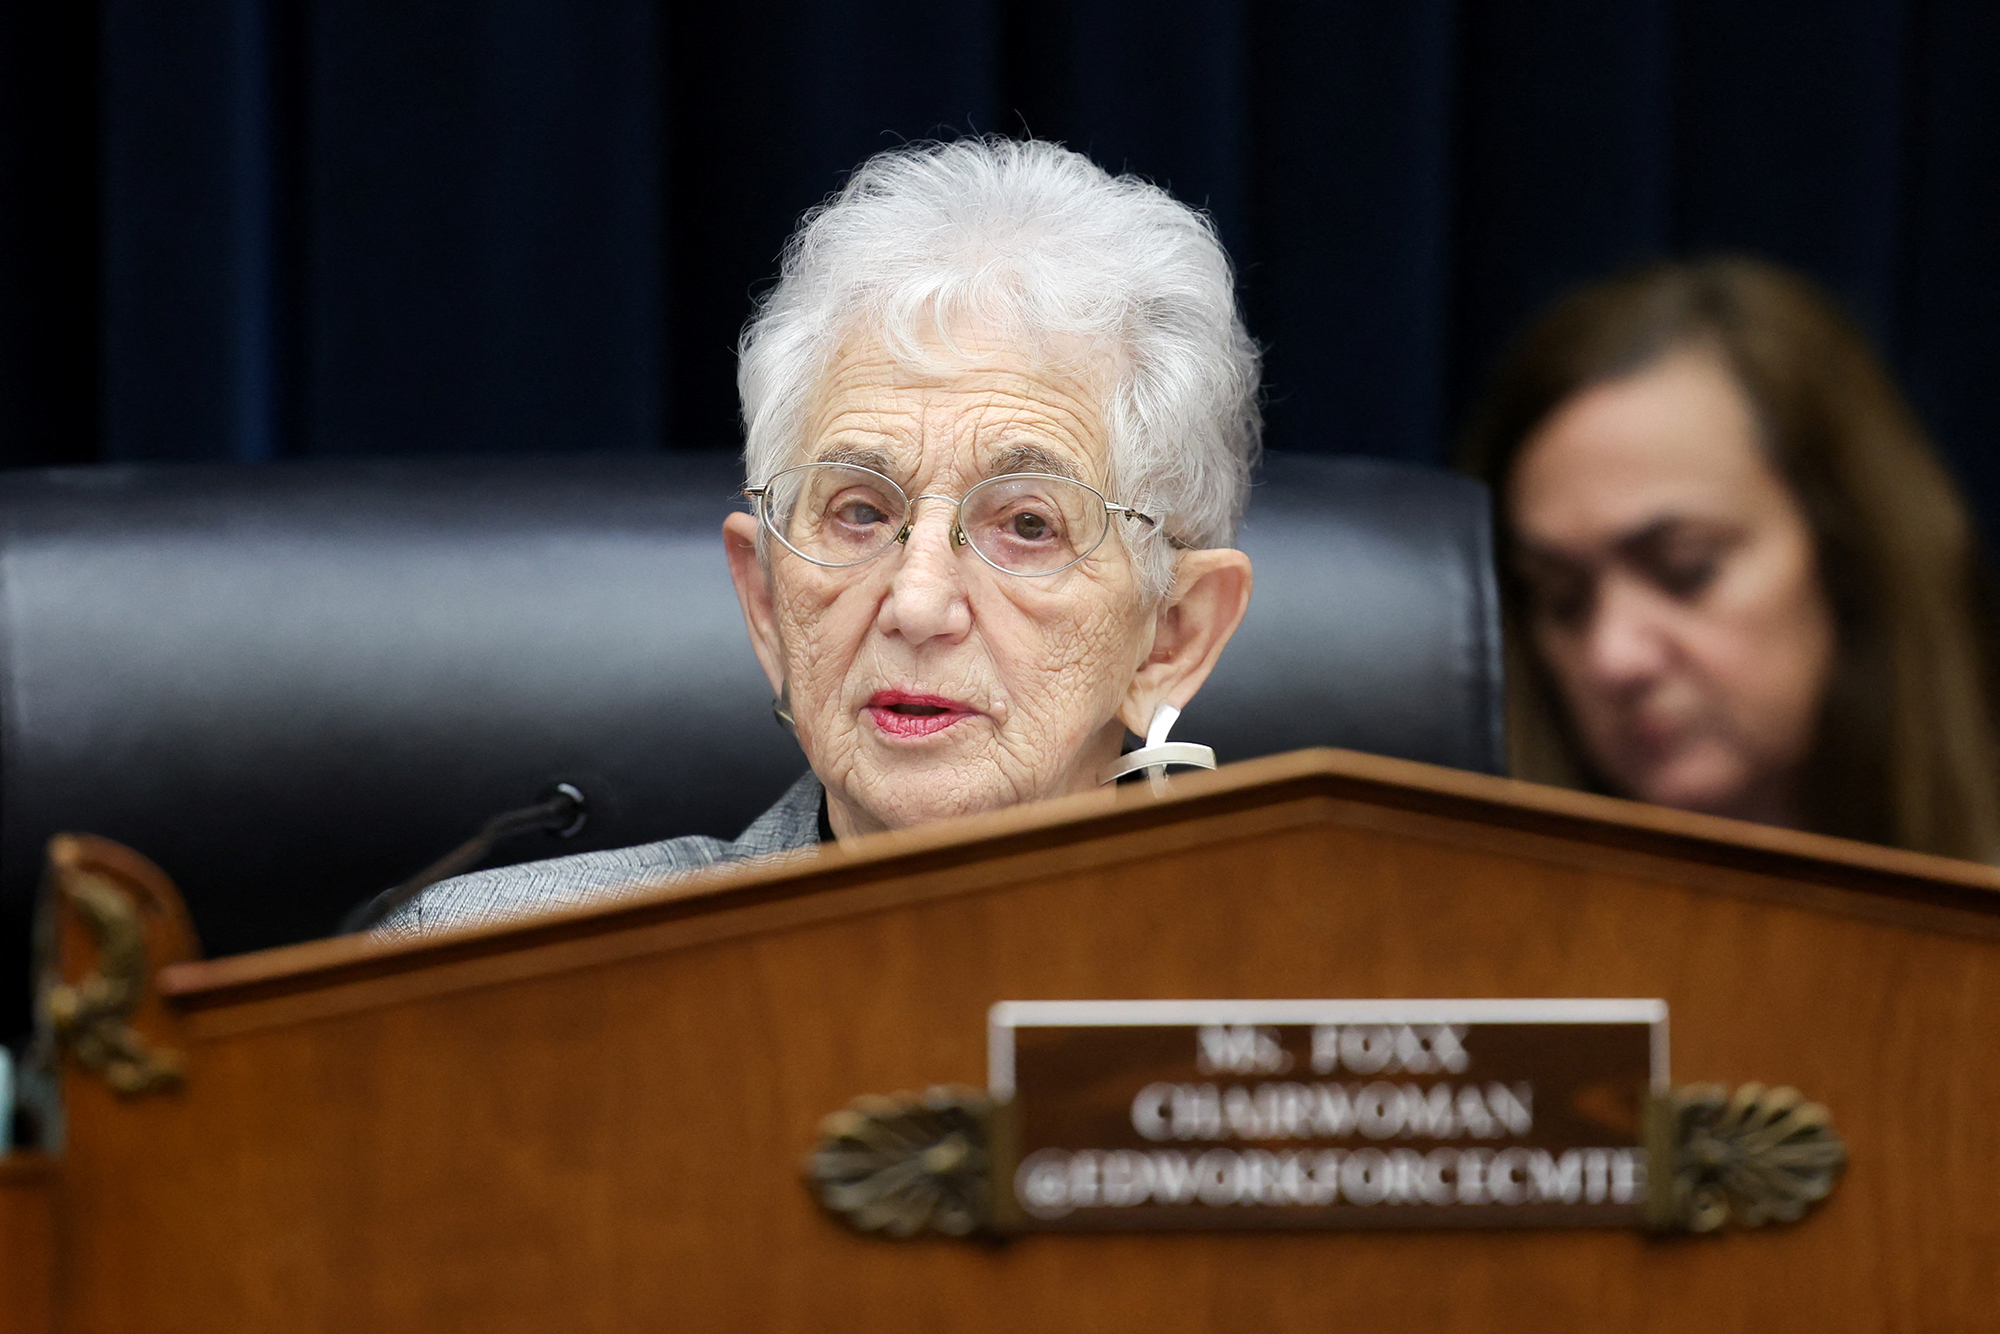 Committee chairwoman Rep. Virginia Foxx (R-NC) speaks during a House Education and the Workforce Committee hearing on pro-Palestinian protests on college campuses, on Capitol Hill in Washington, today.